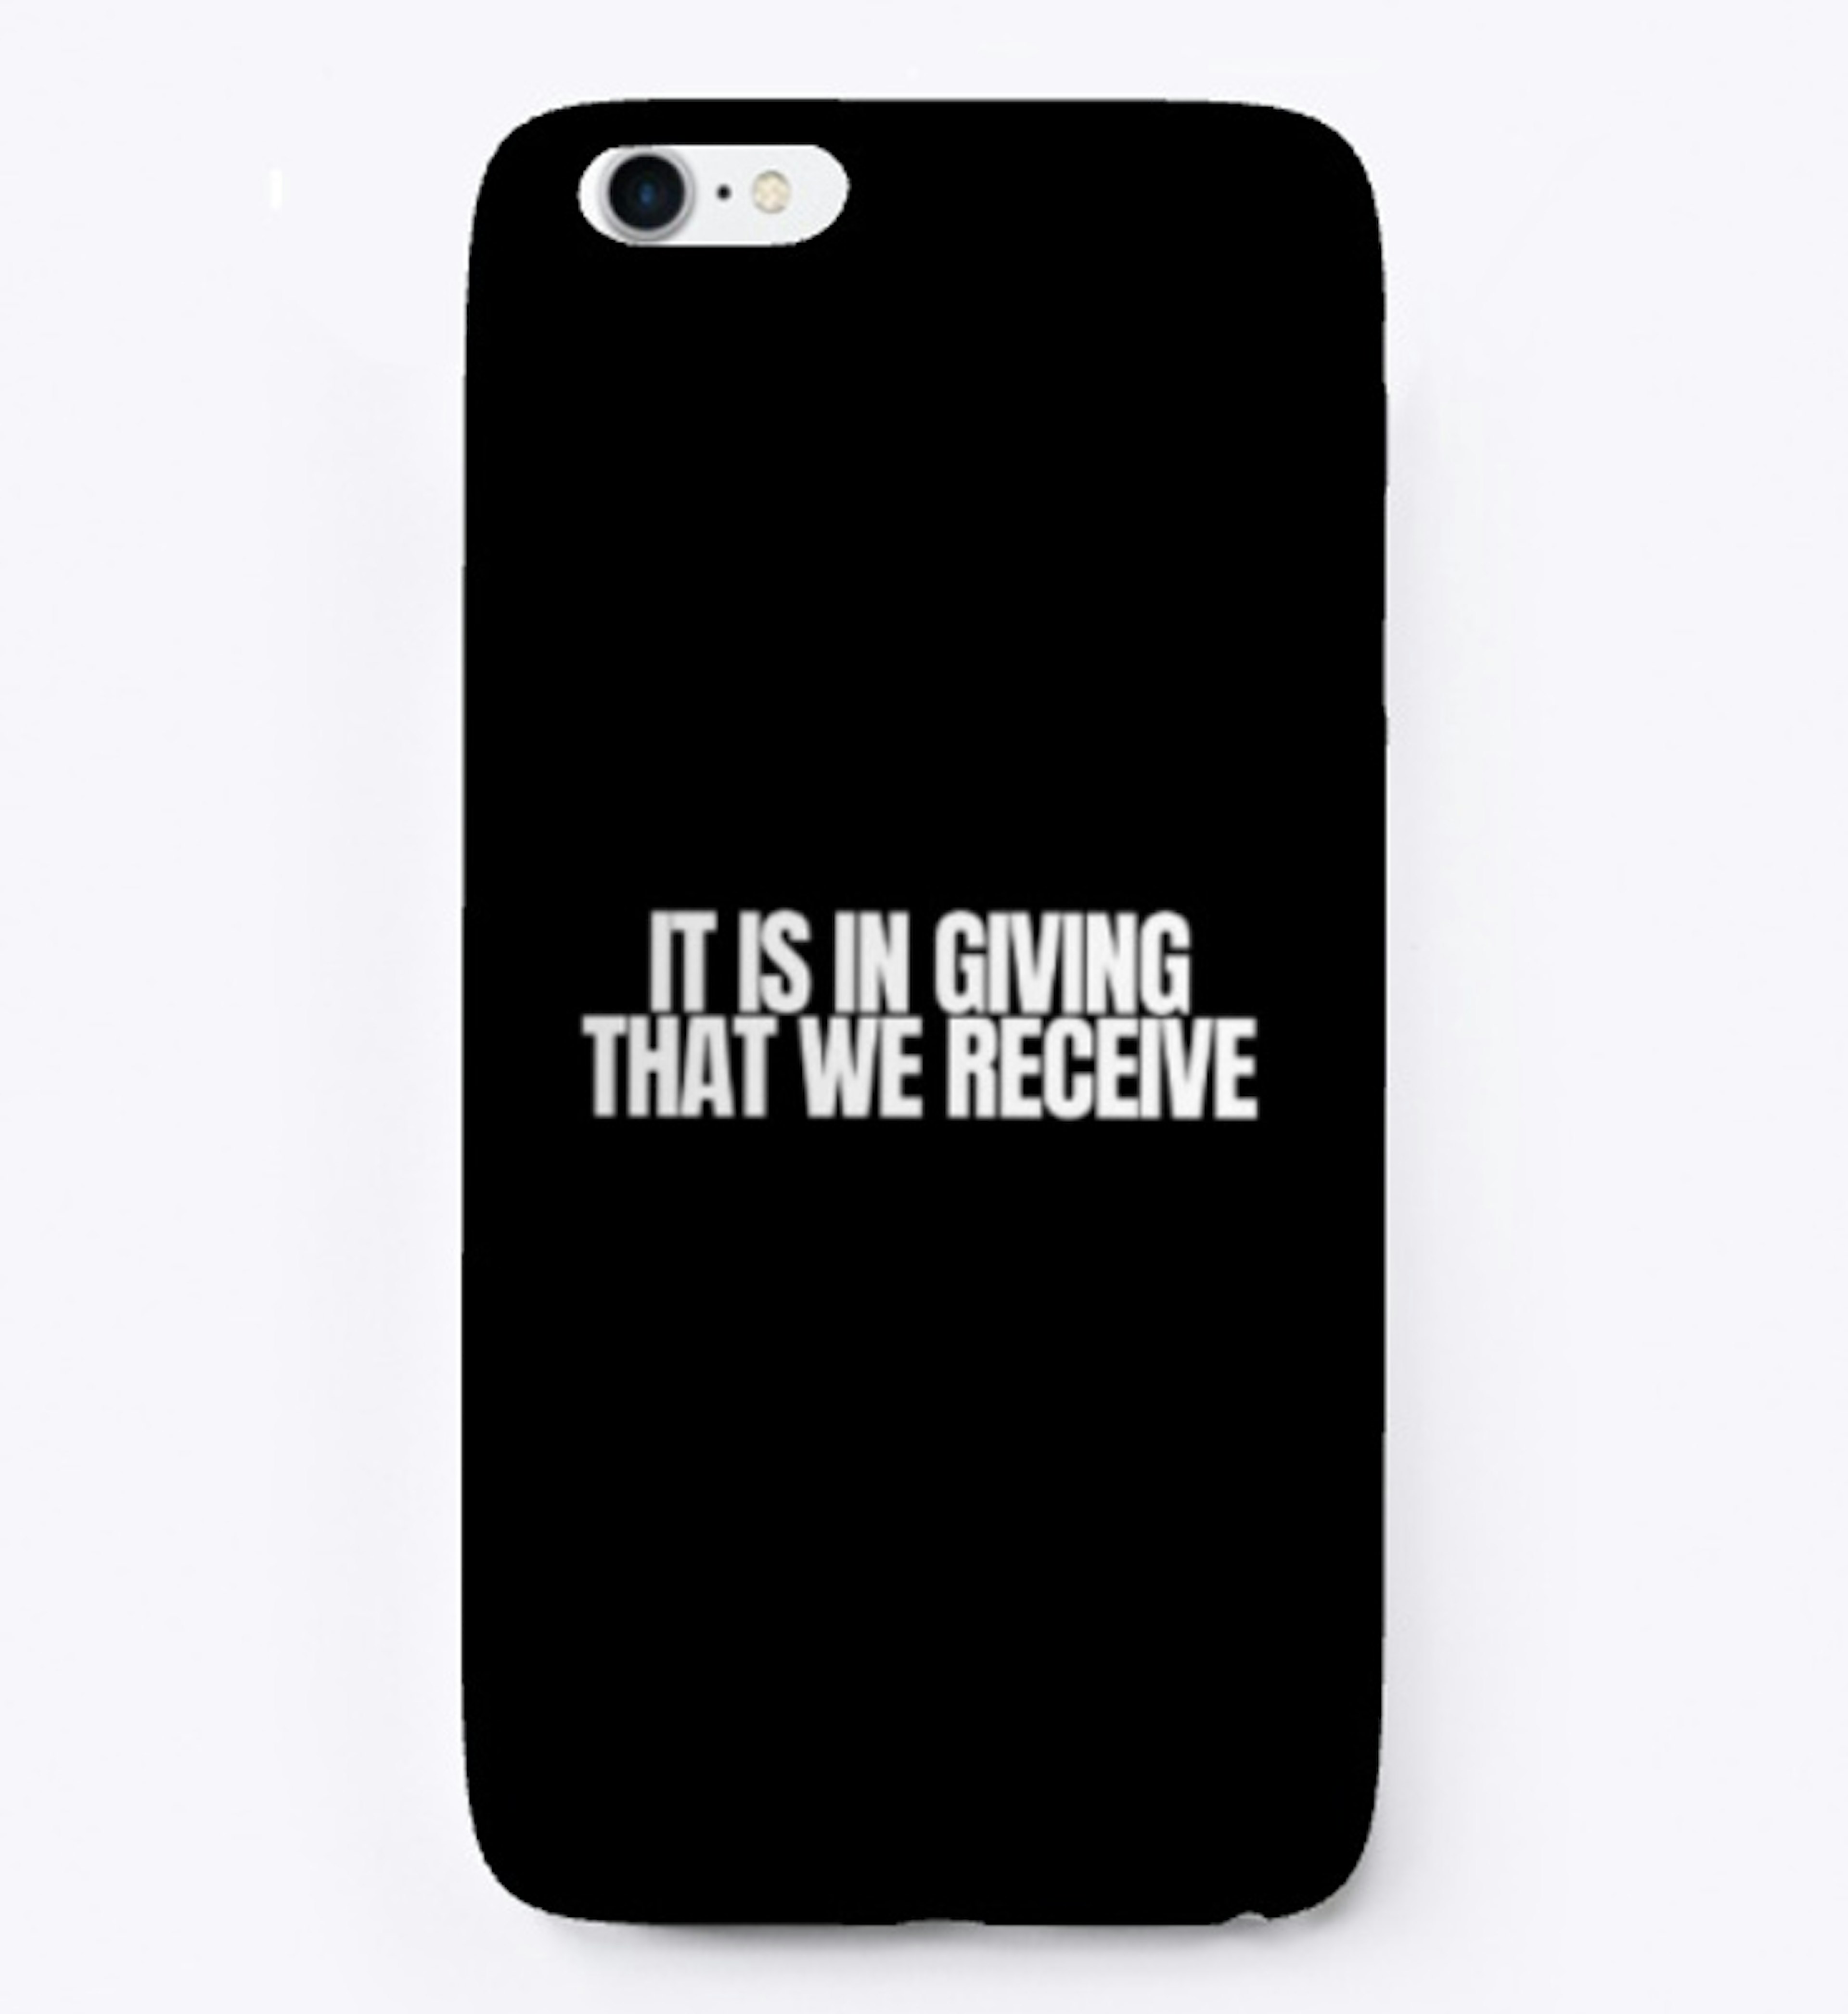  'It Is In Giving...'  iphone case